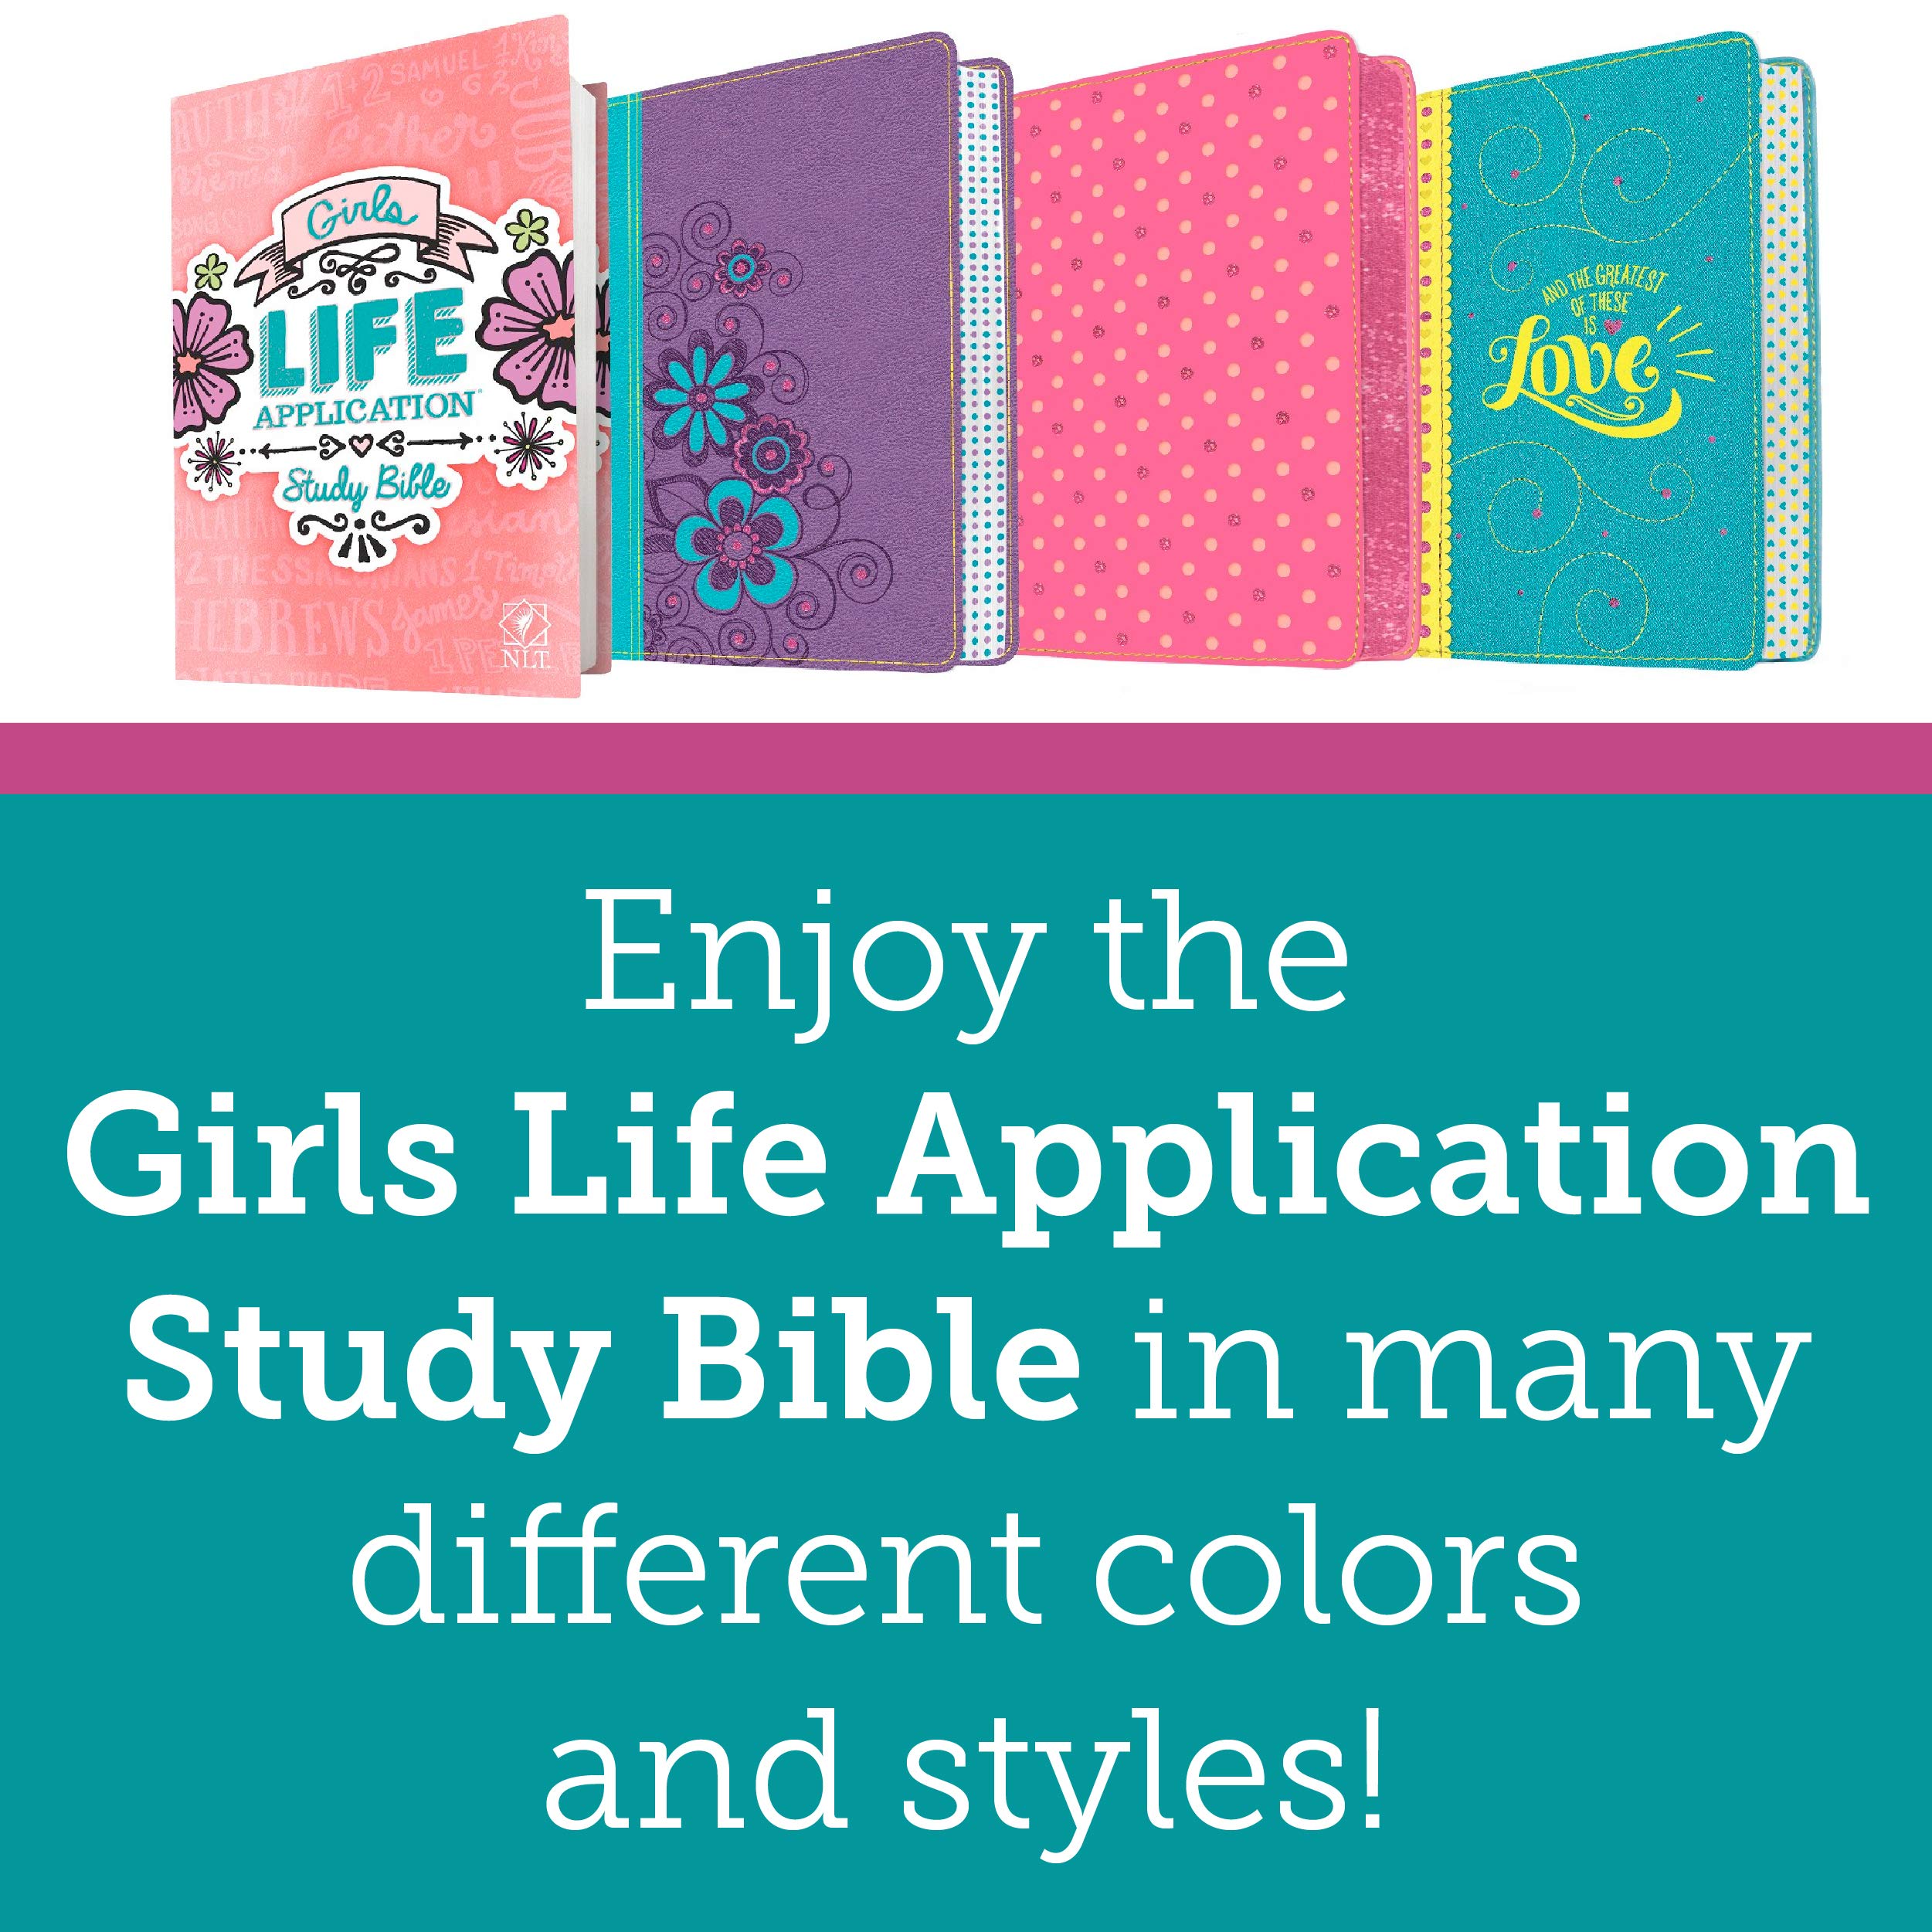 Tyndale NLT Girls Life Application Study Bible, TuTone (LeatherLike, Teal/Yellow), NLT Bible with Over 800 Notes and Features, Foundations for Your Faith Sections